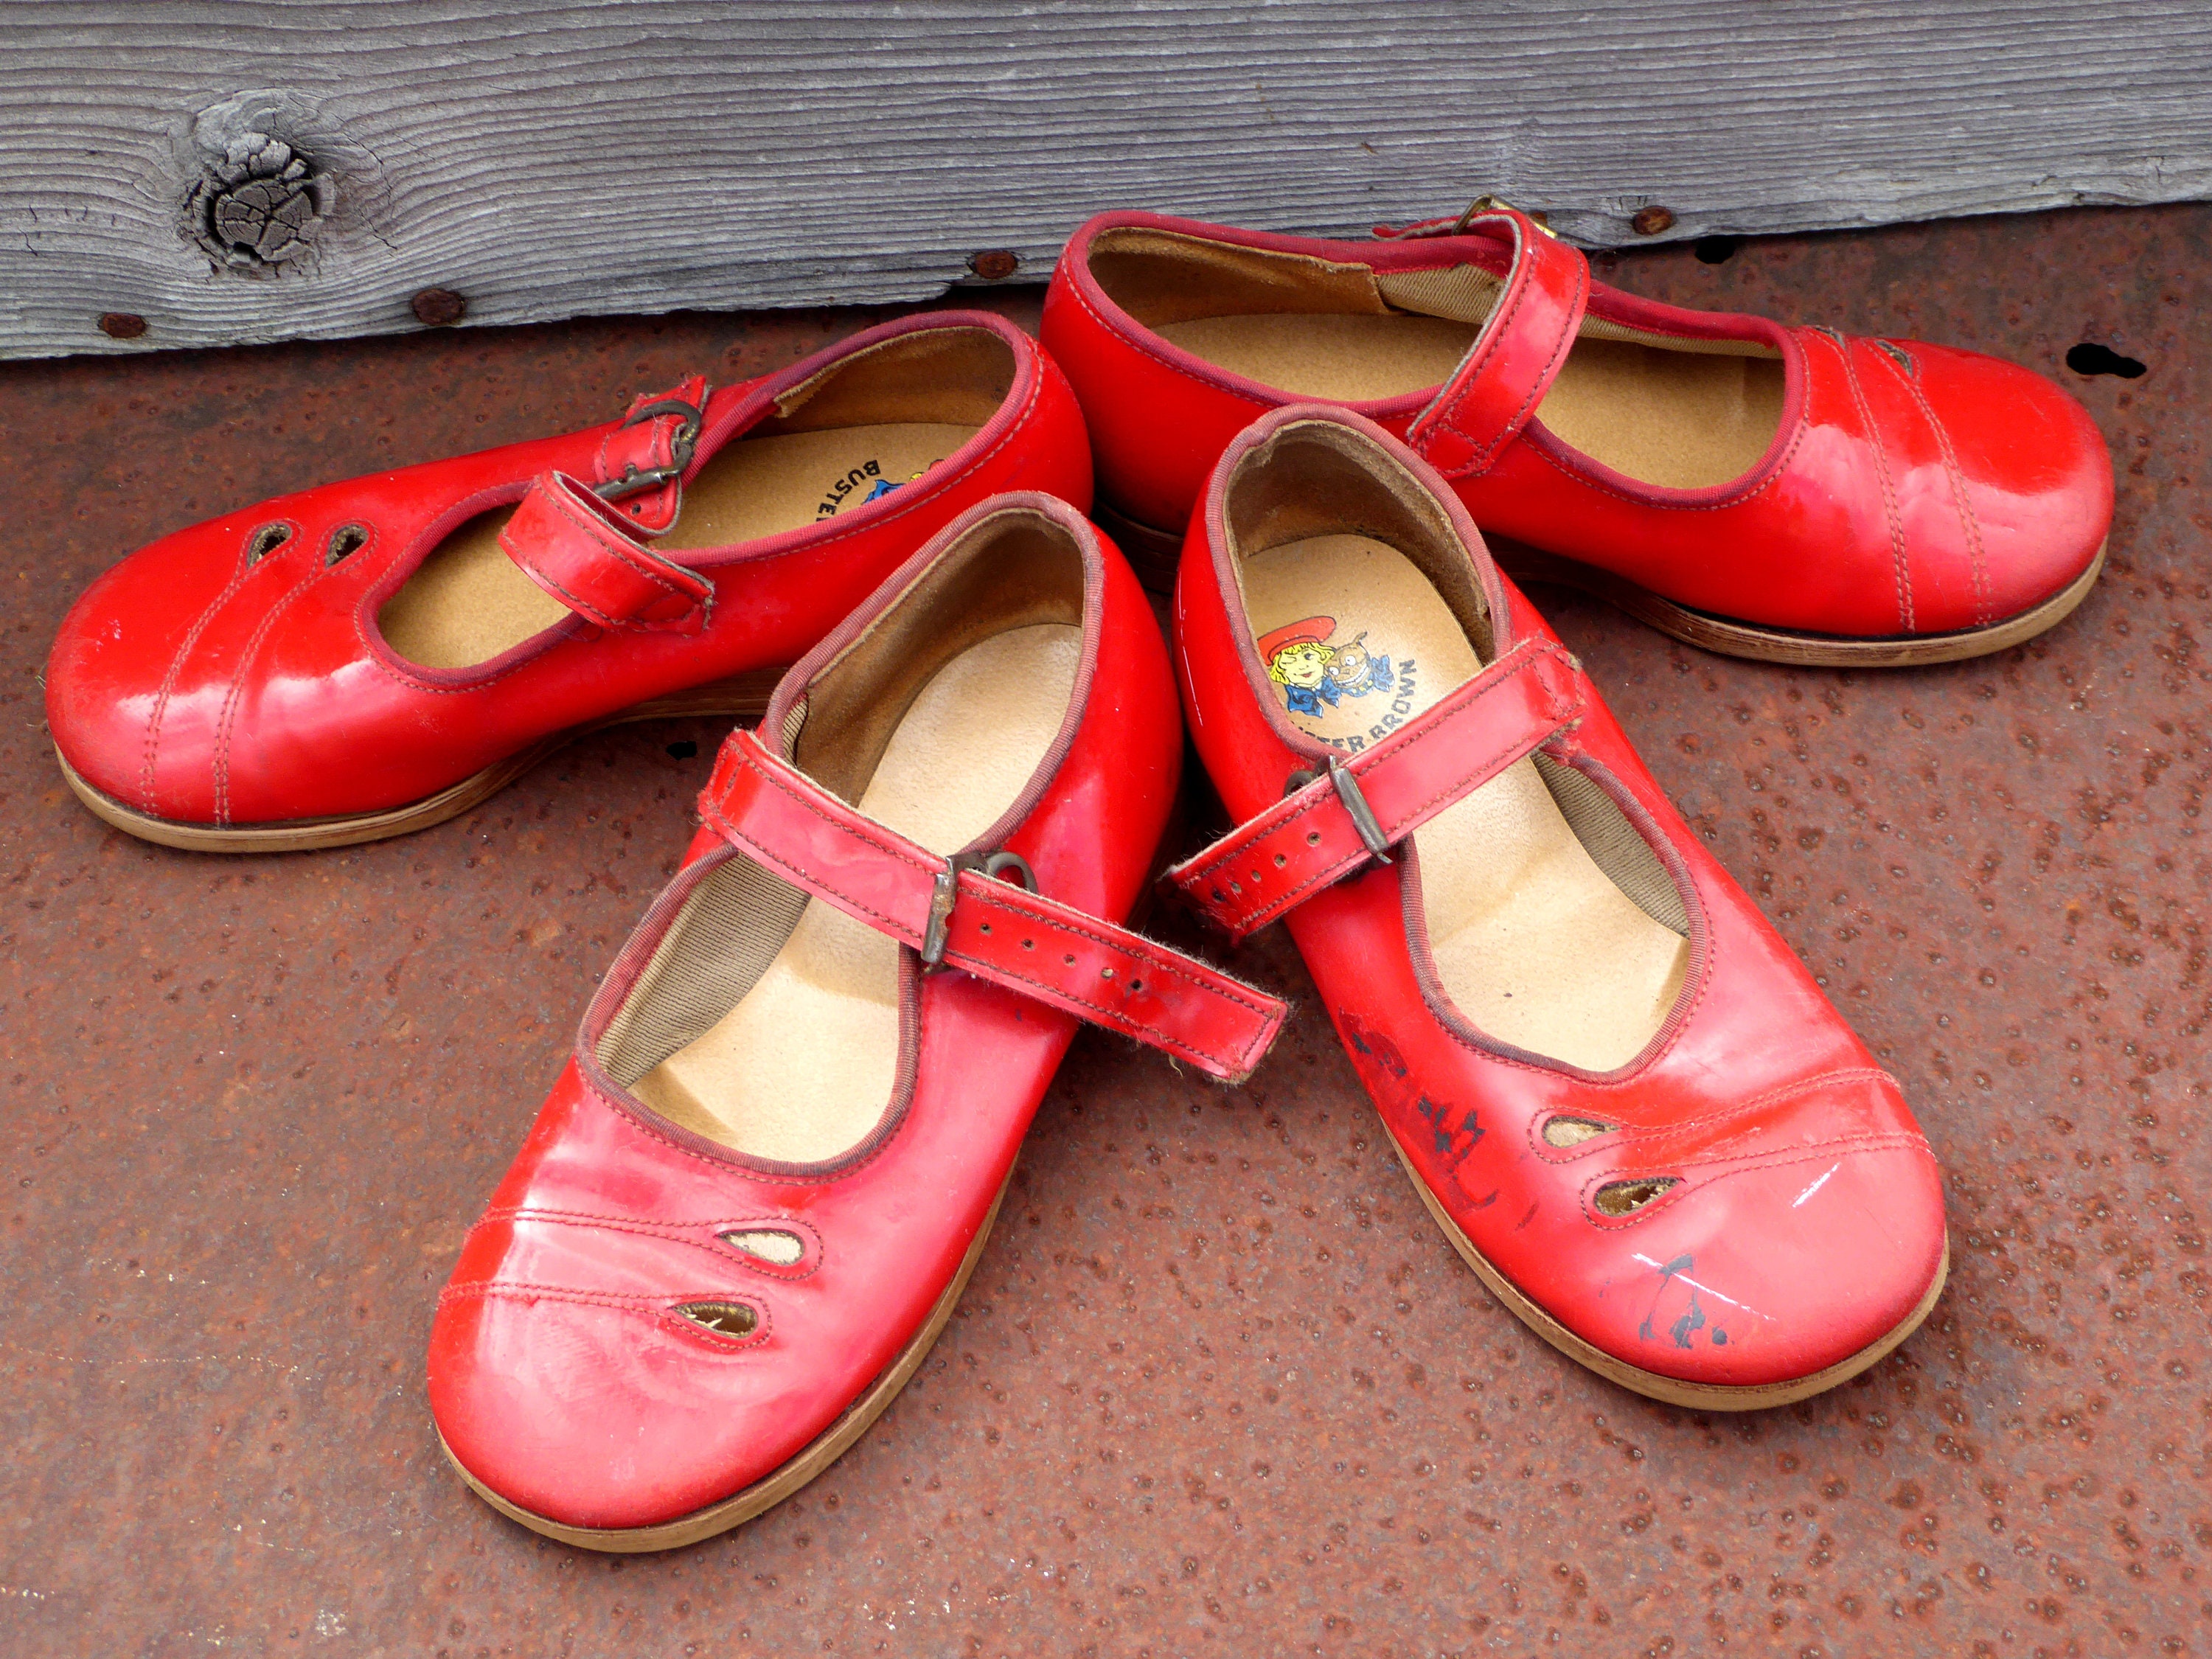 Priced for TWO Pair Red Paten Leather Toddler Mary Janes by Buster Brown Shoes I-A Schoenen Meisjesschoenen Mary Janes 